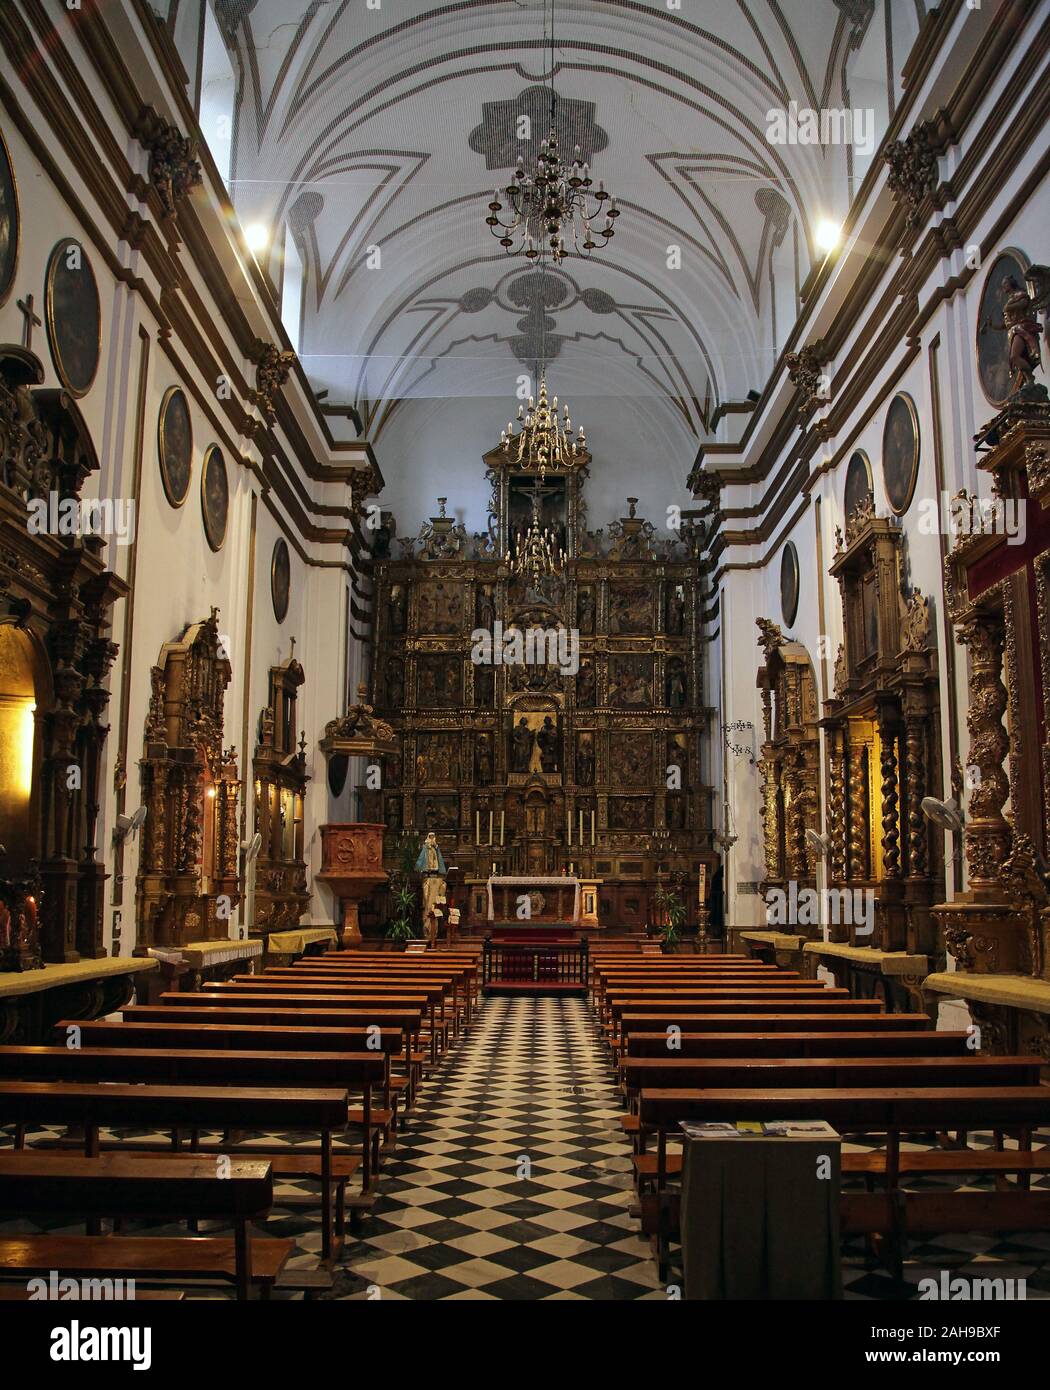 Interior of the Cathedral of Our Lady of Incarnation / "the Cathedral" in the city centre Malaga Costa del Sol Andalucia Spain Stock Photo